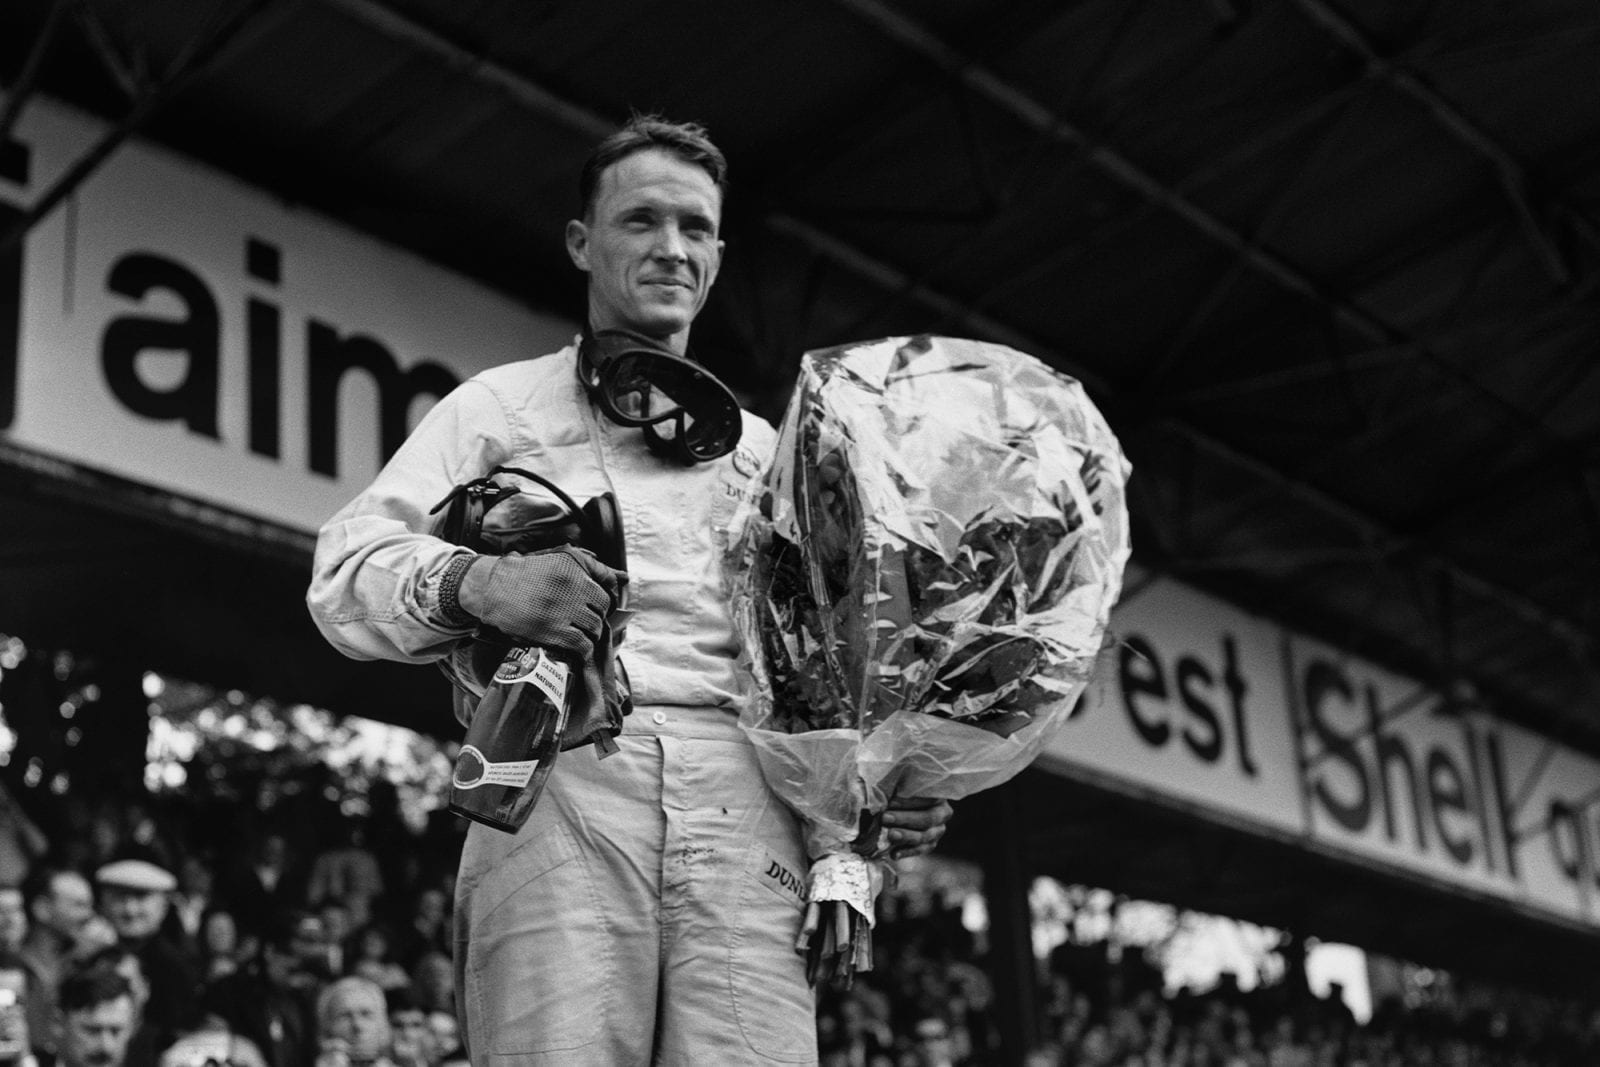 Brabham's Dan Gurney stands on the podium, champagne and bouquet in hand.